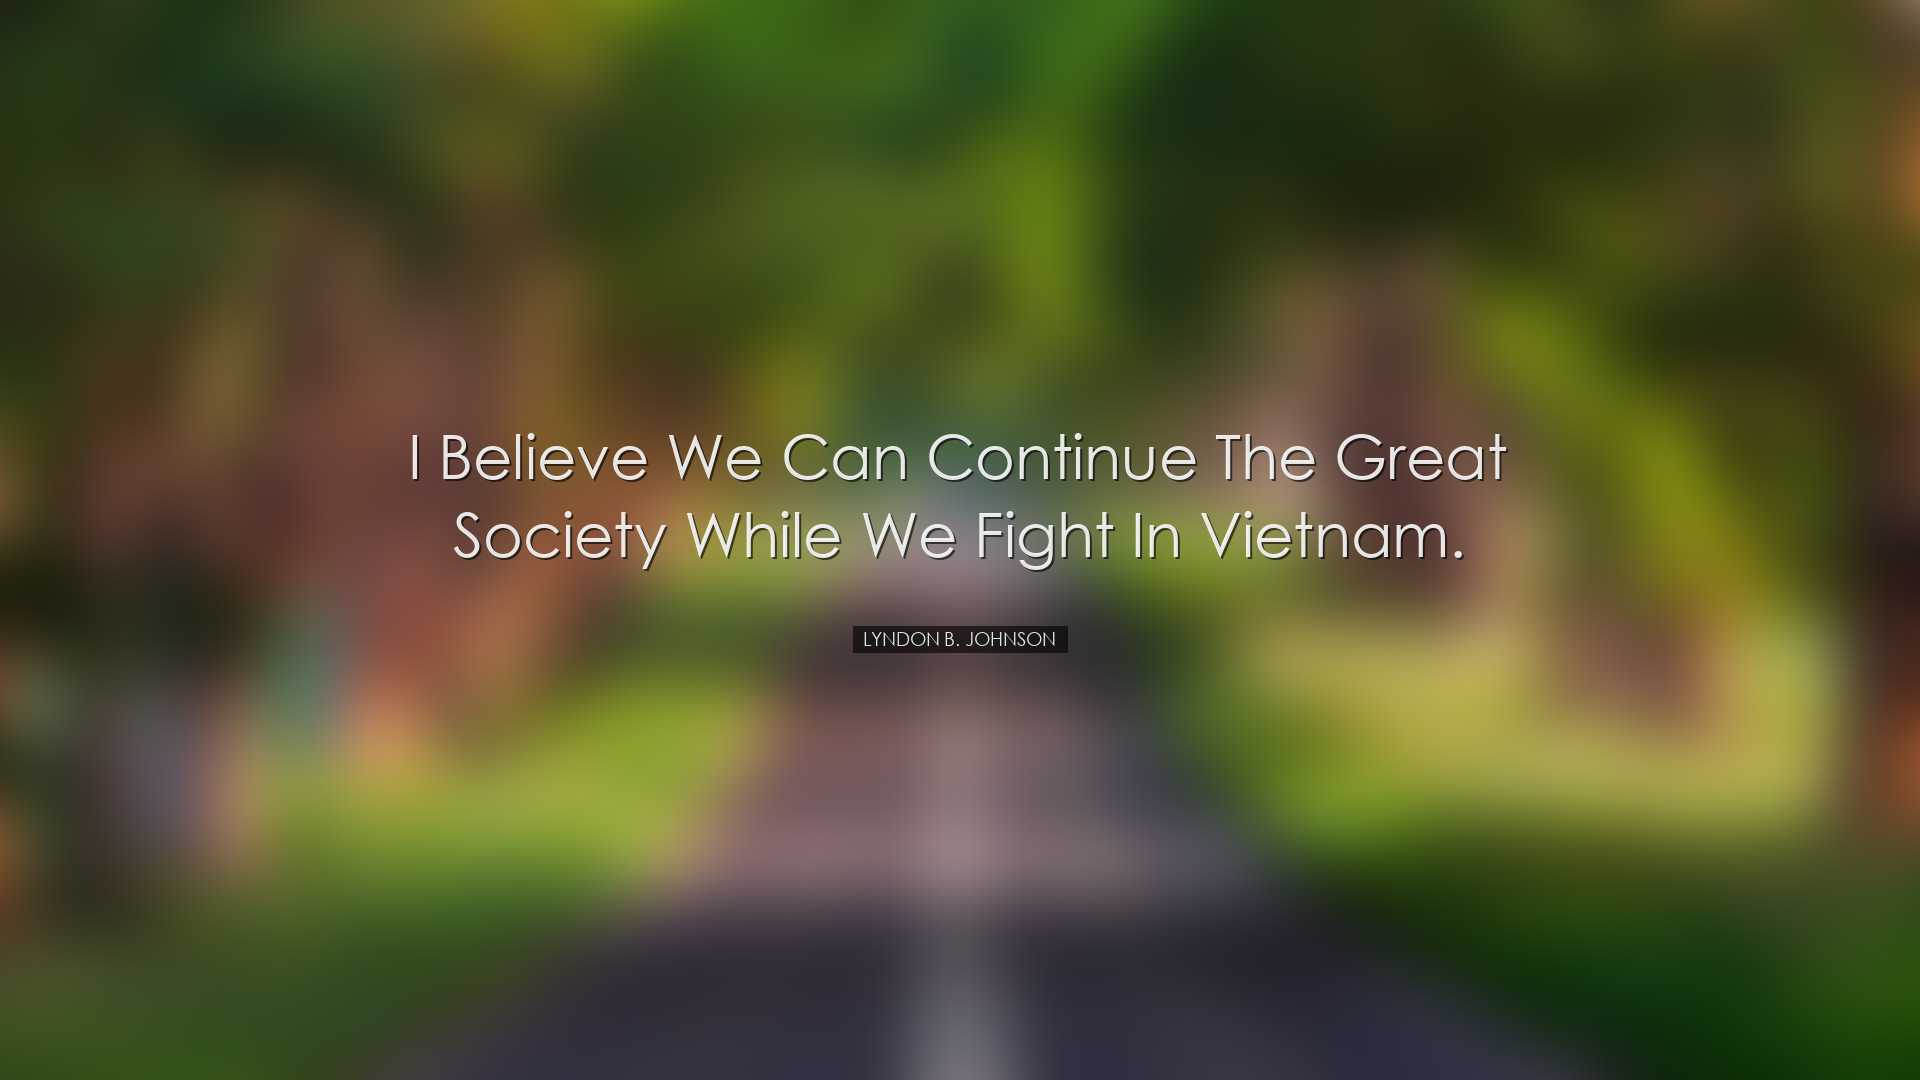 I believe we can continue the Great Society while we fight in Viet